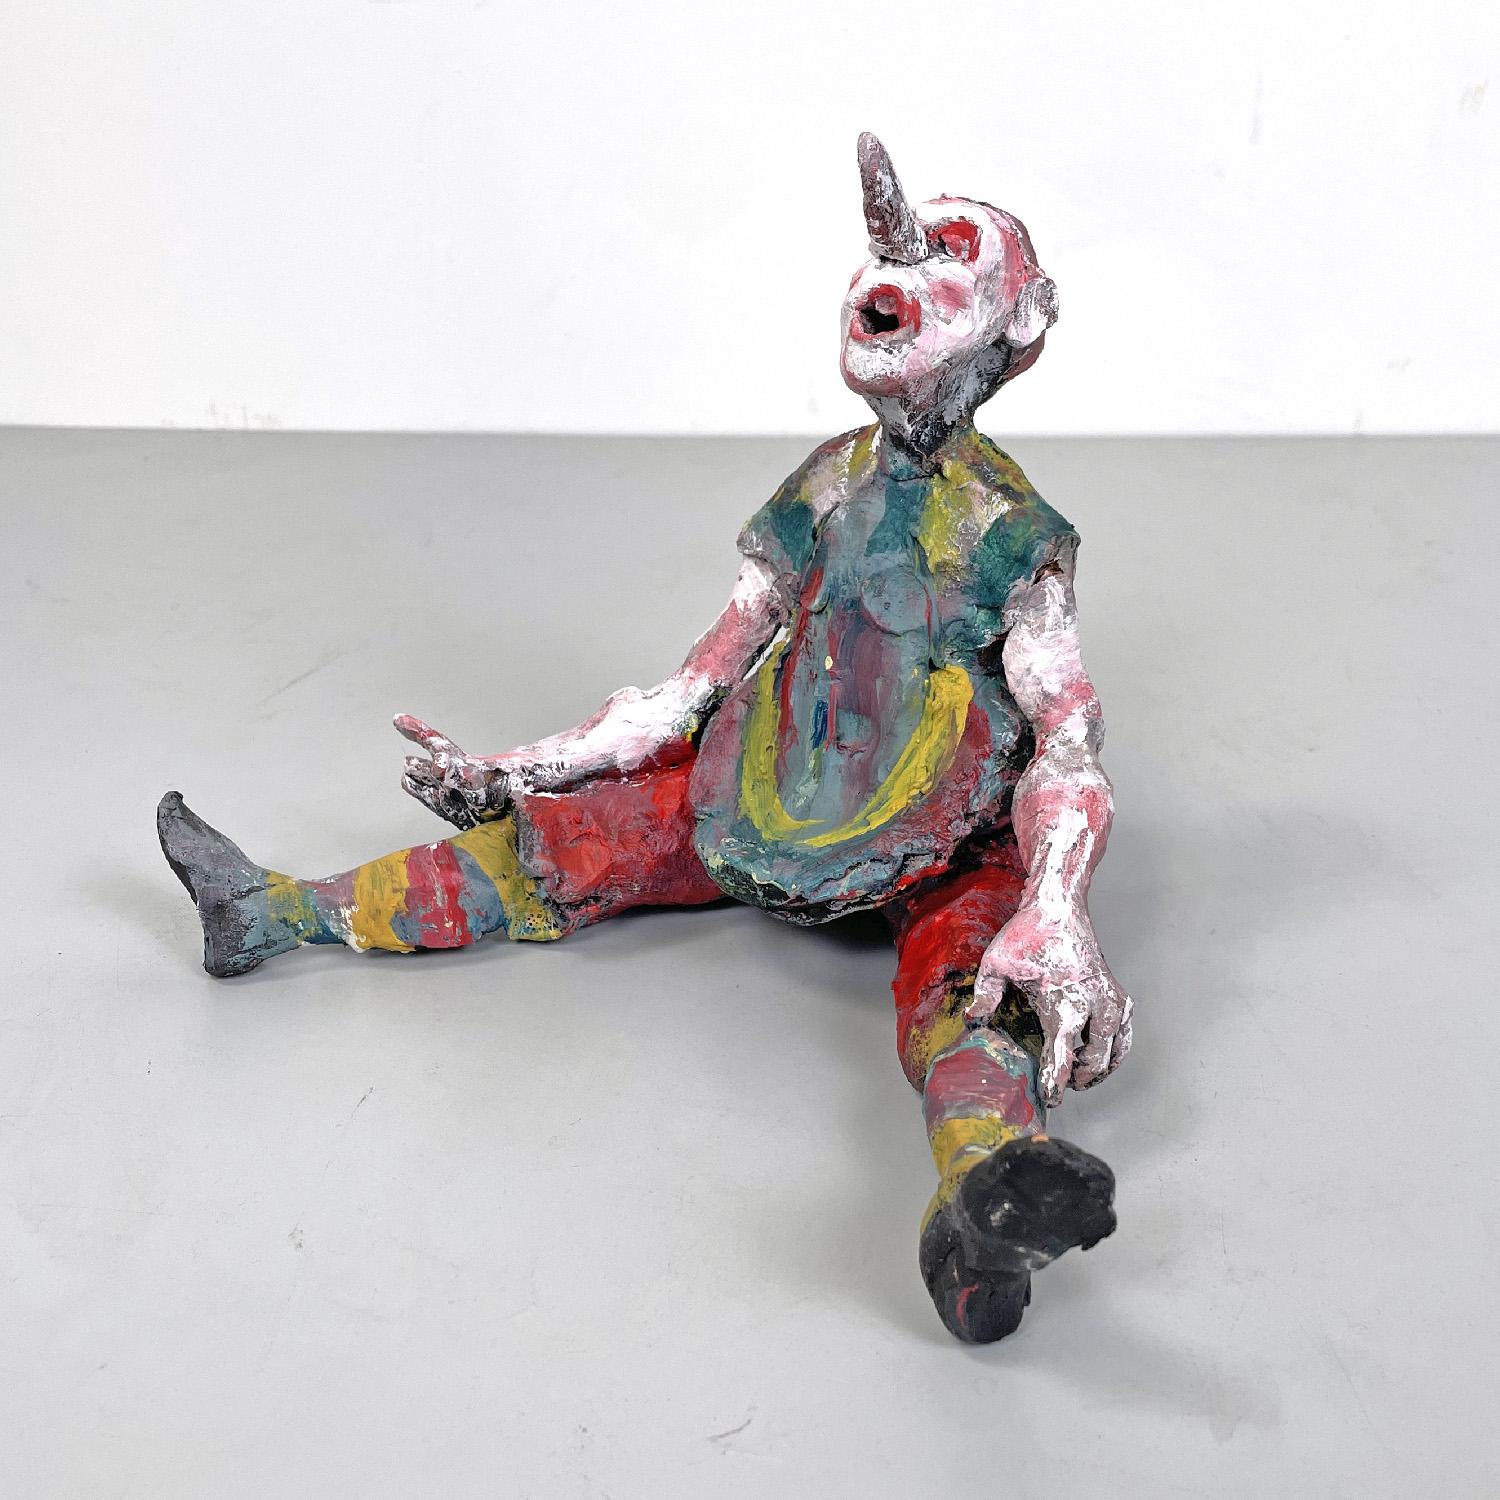 Italian contemporary terracotta sculpture of Pinocchio by Alfredo Milani, 2010s
Pinocchio sculpture in polychrome terracotta and acrylic. The material is worked in a rough and material way, as is the paint that decorates it in shades of white, red